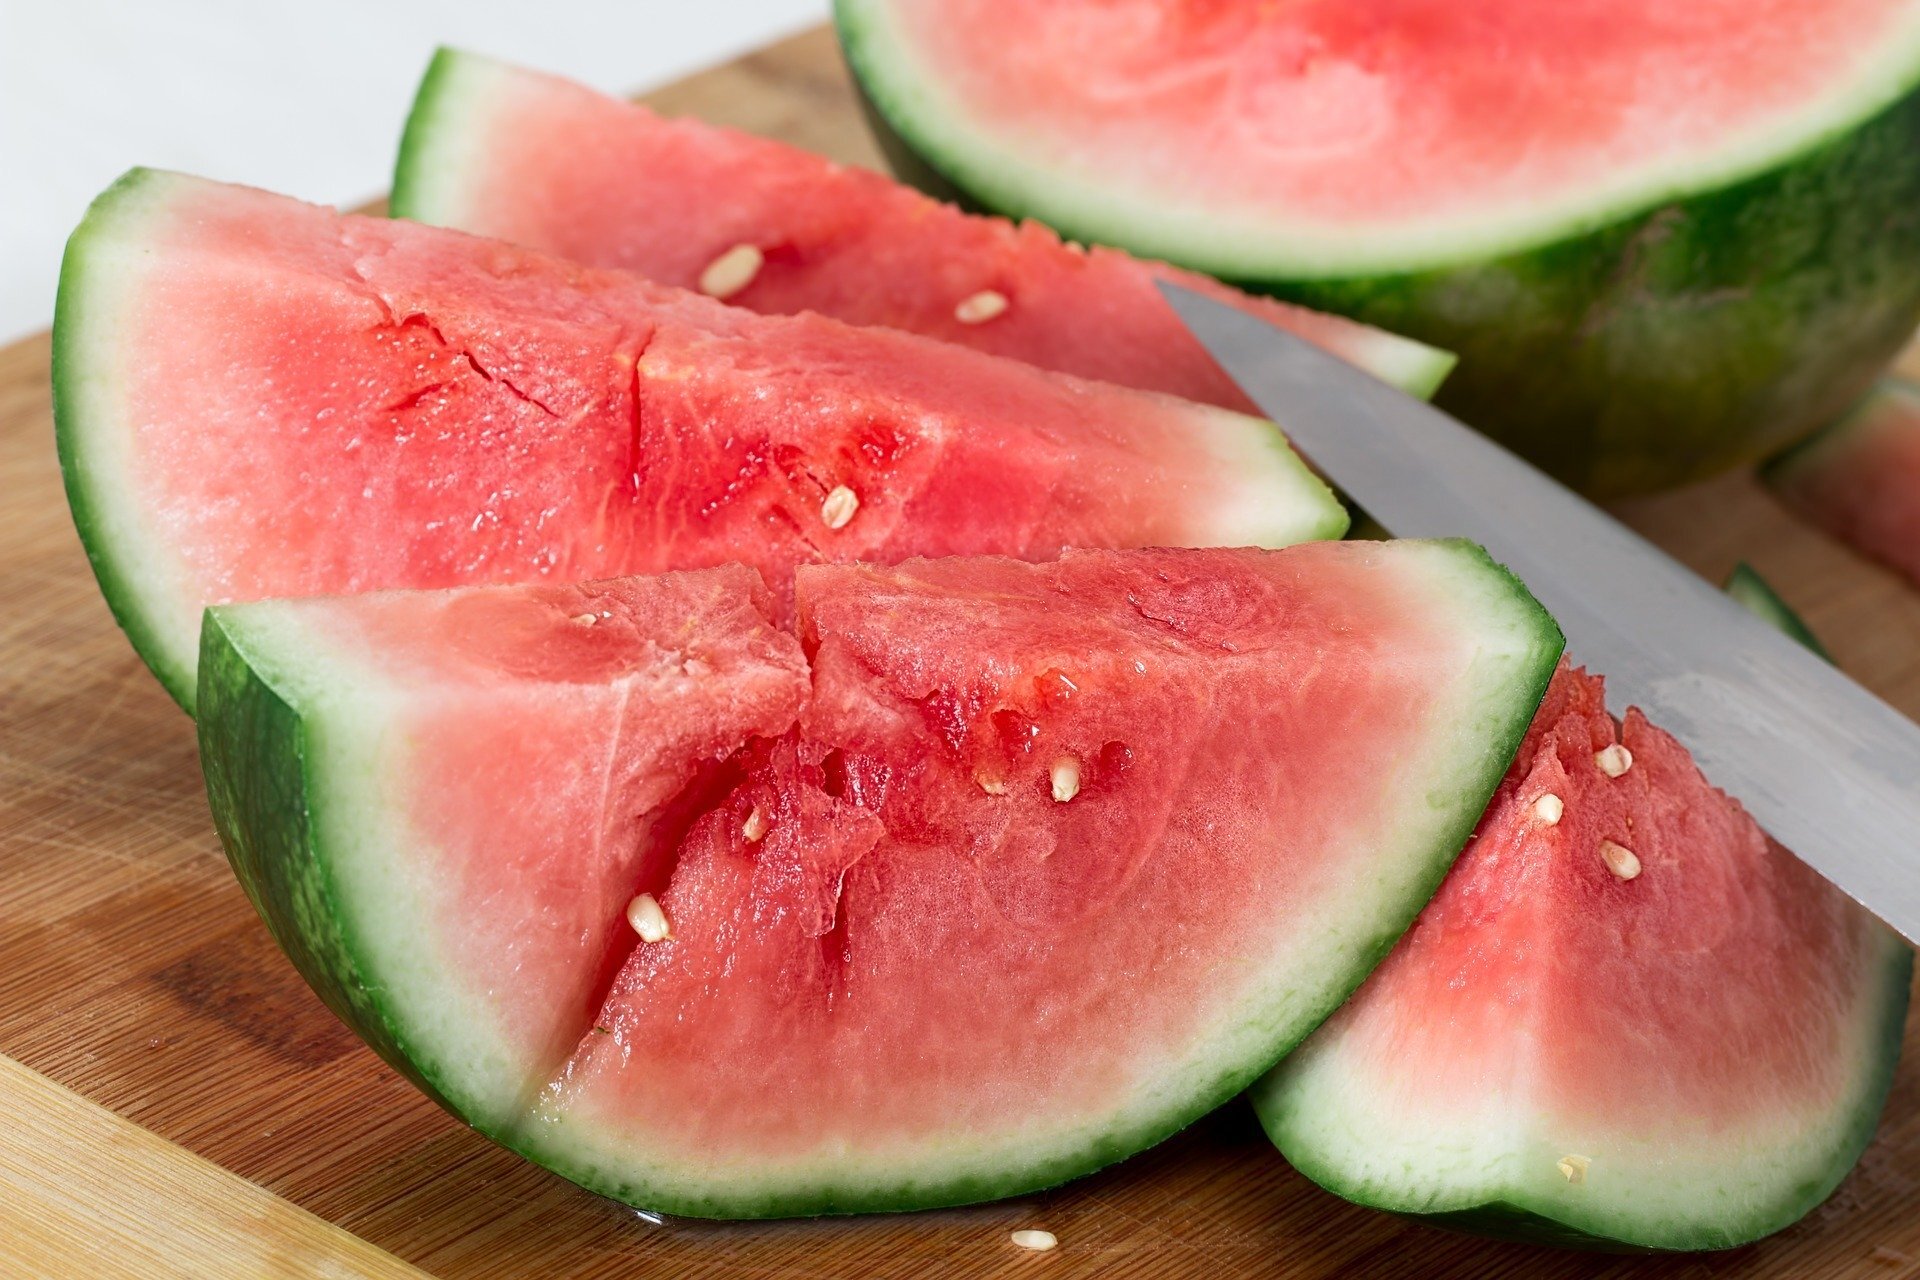 Watermelon supplements bring health benefits to obese mice